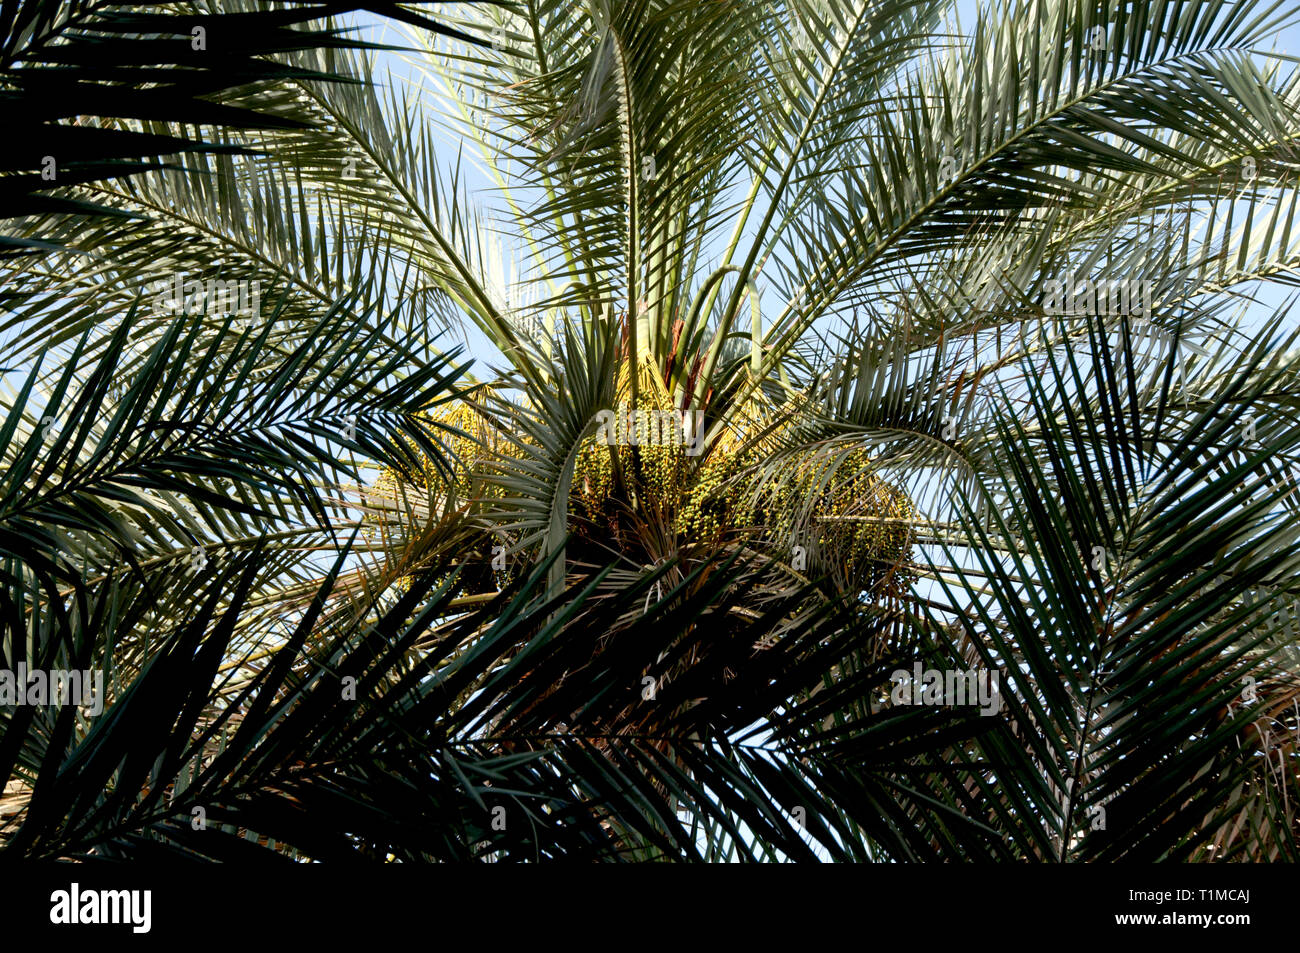 Date palms in Oman Stock Photo